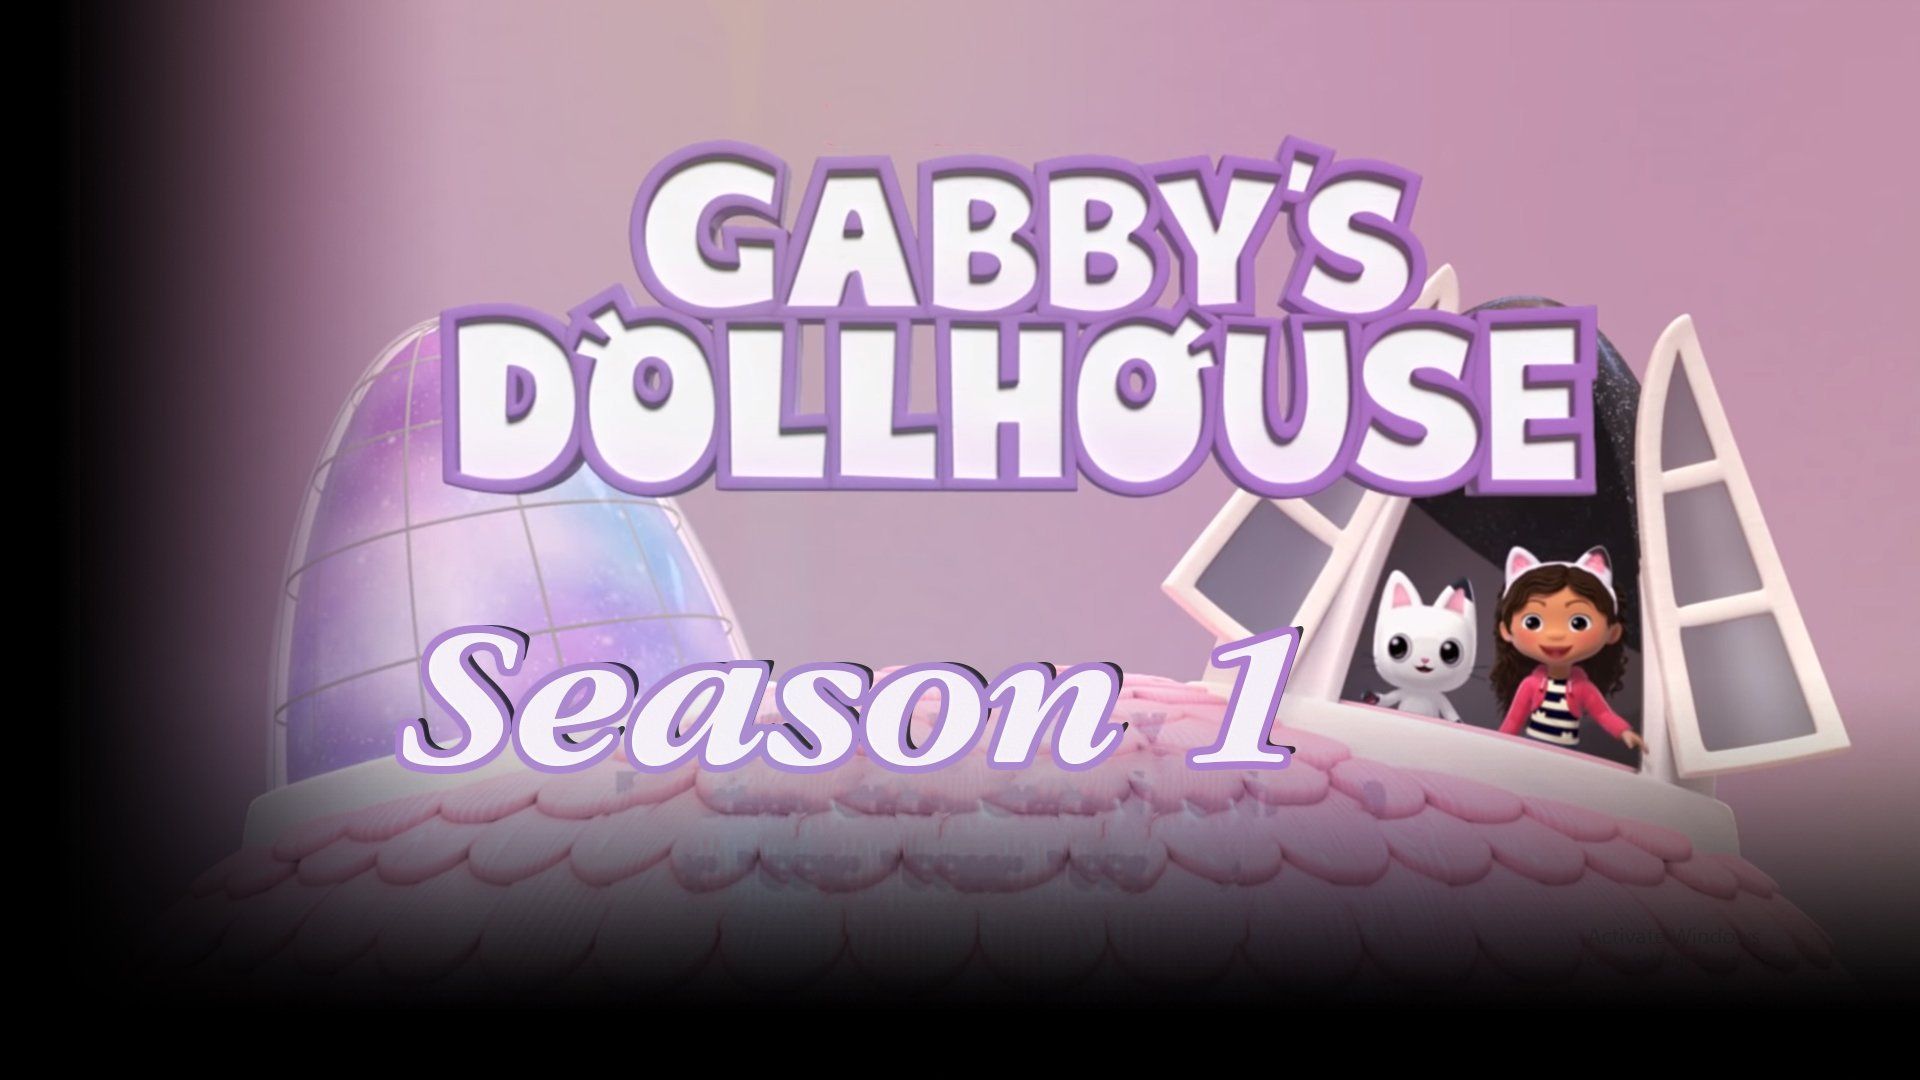 Gabby's Dollhouse Season 1: New Animated Series! Release Date, Cast Info, and